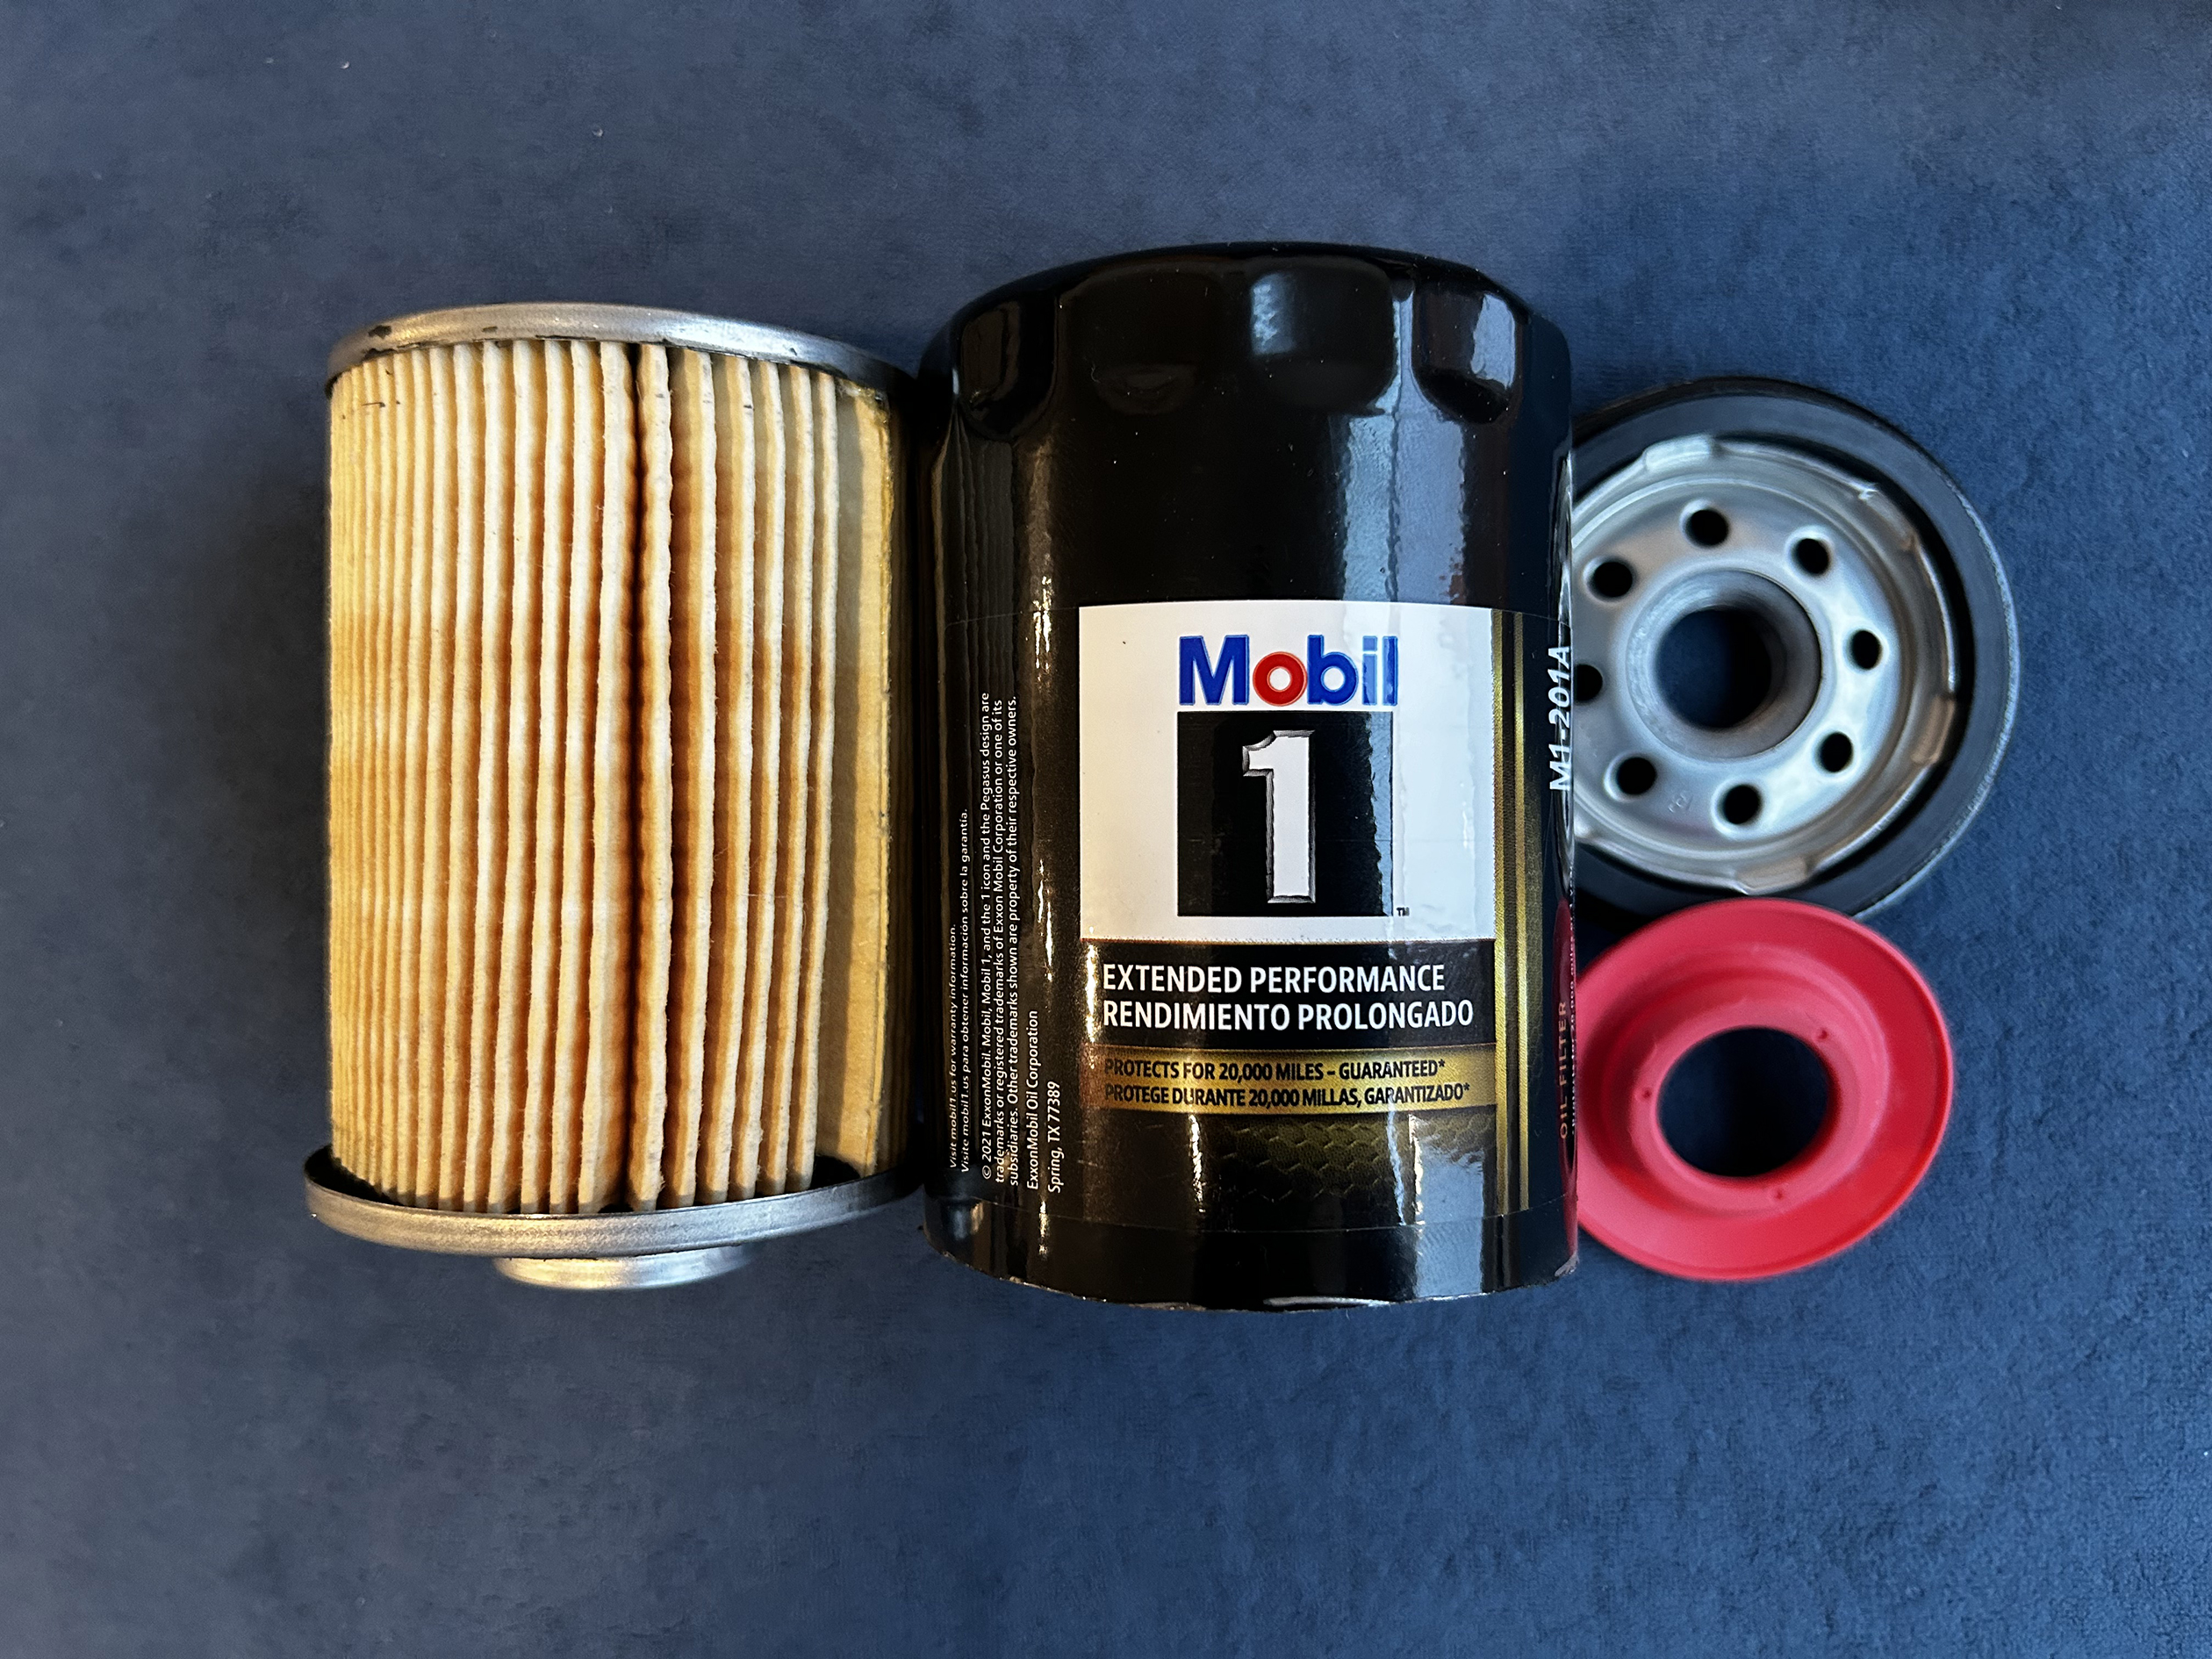 Mobil 1 Oil Filter Review (Extended performance)